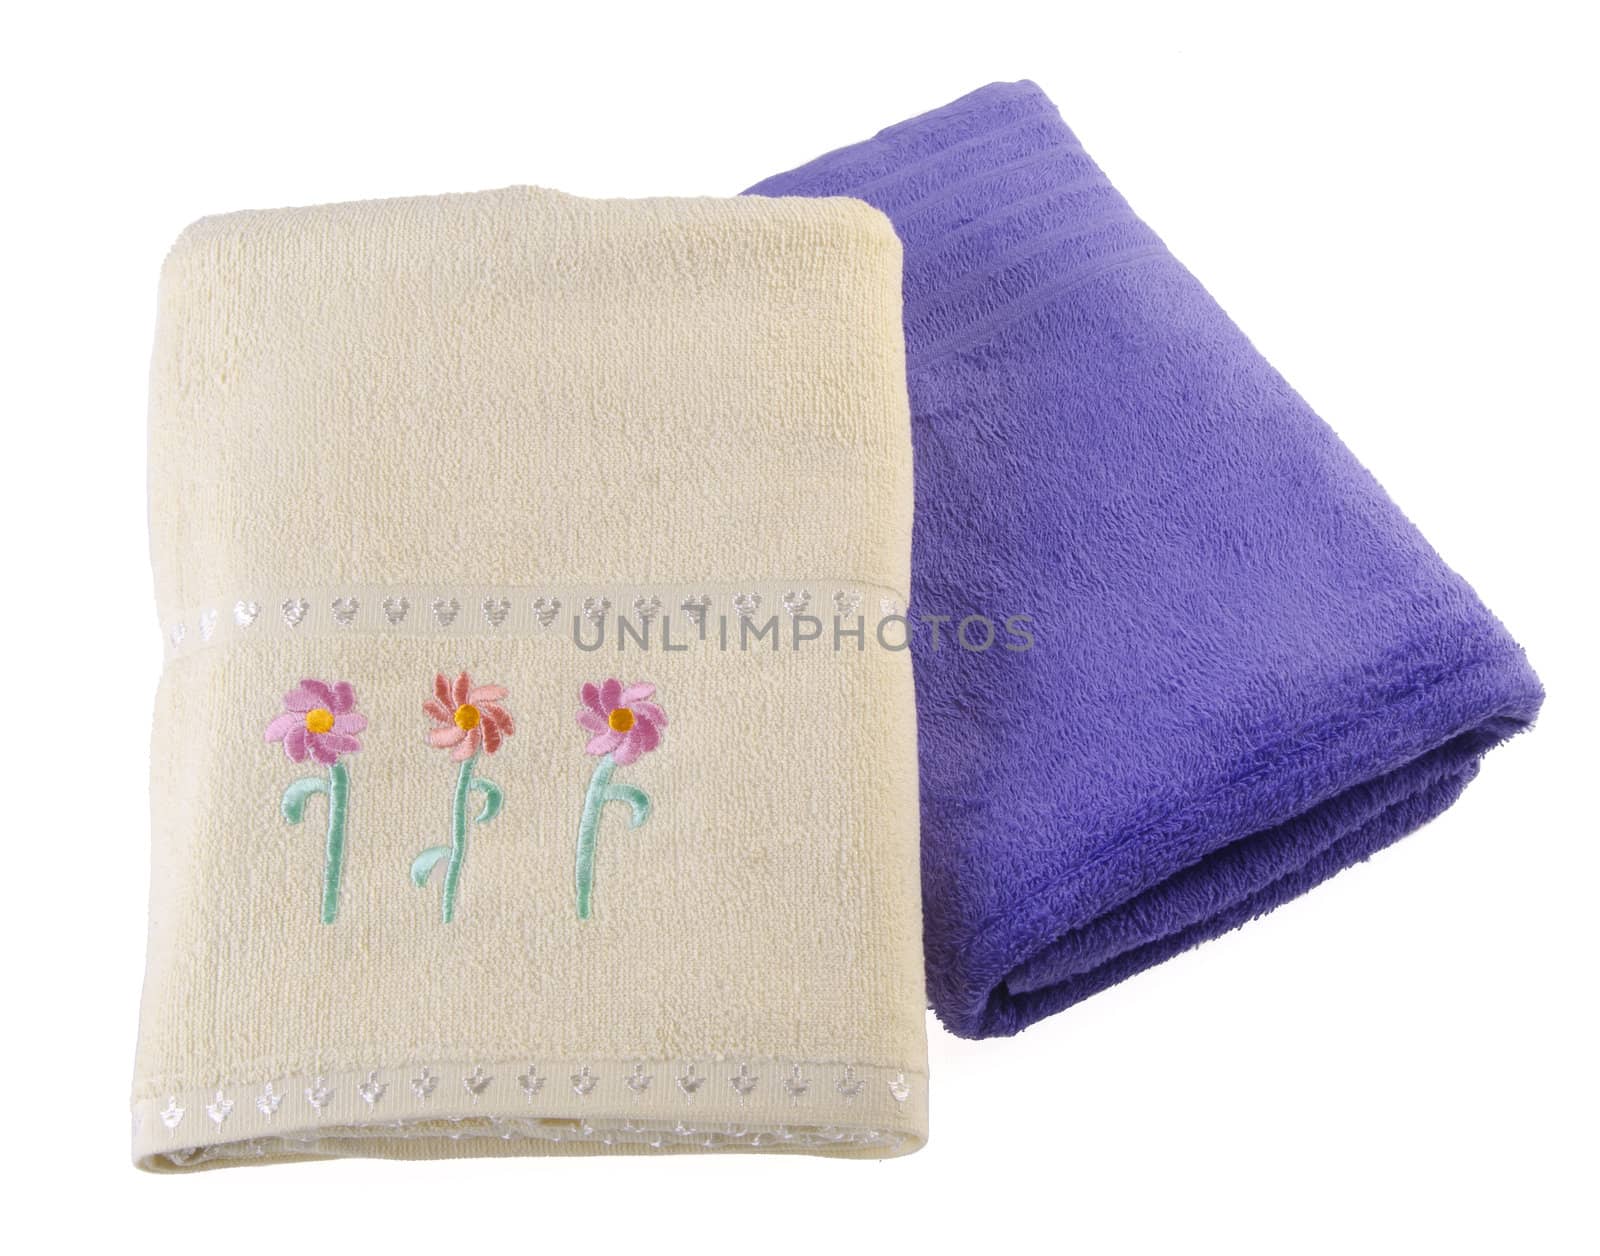 towel on a white background by heinteh